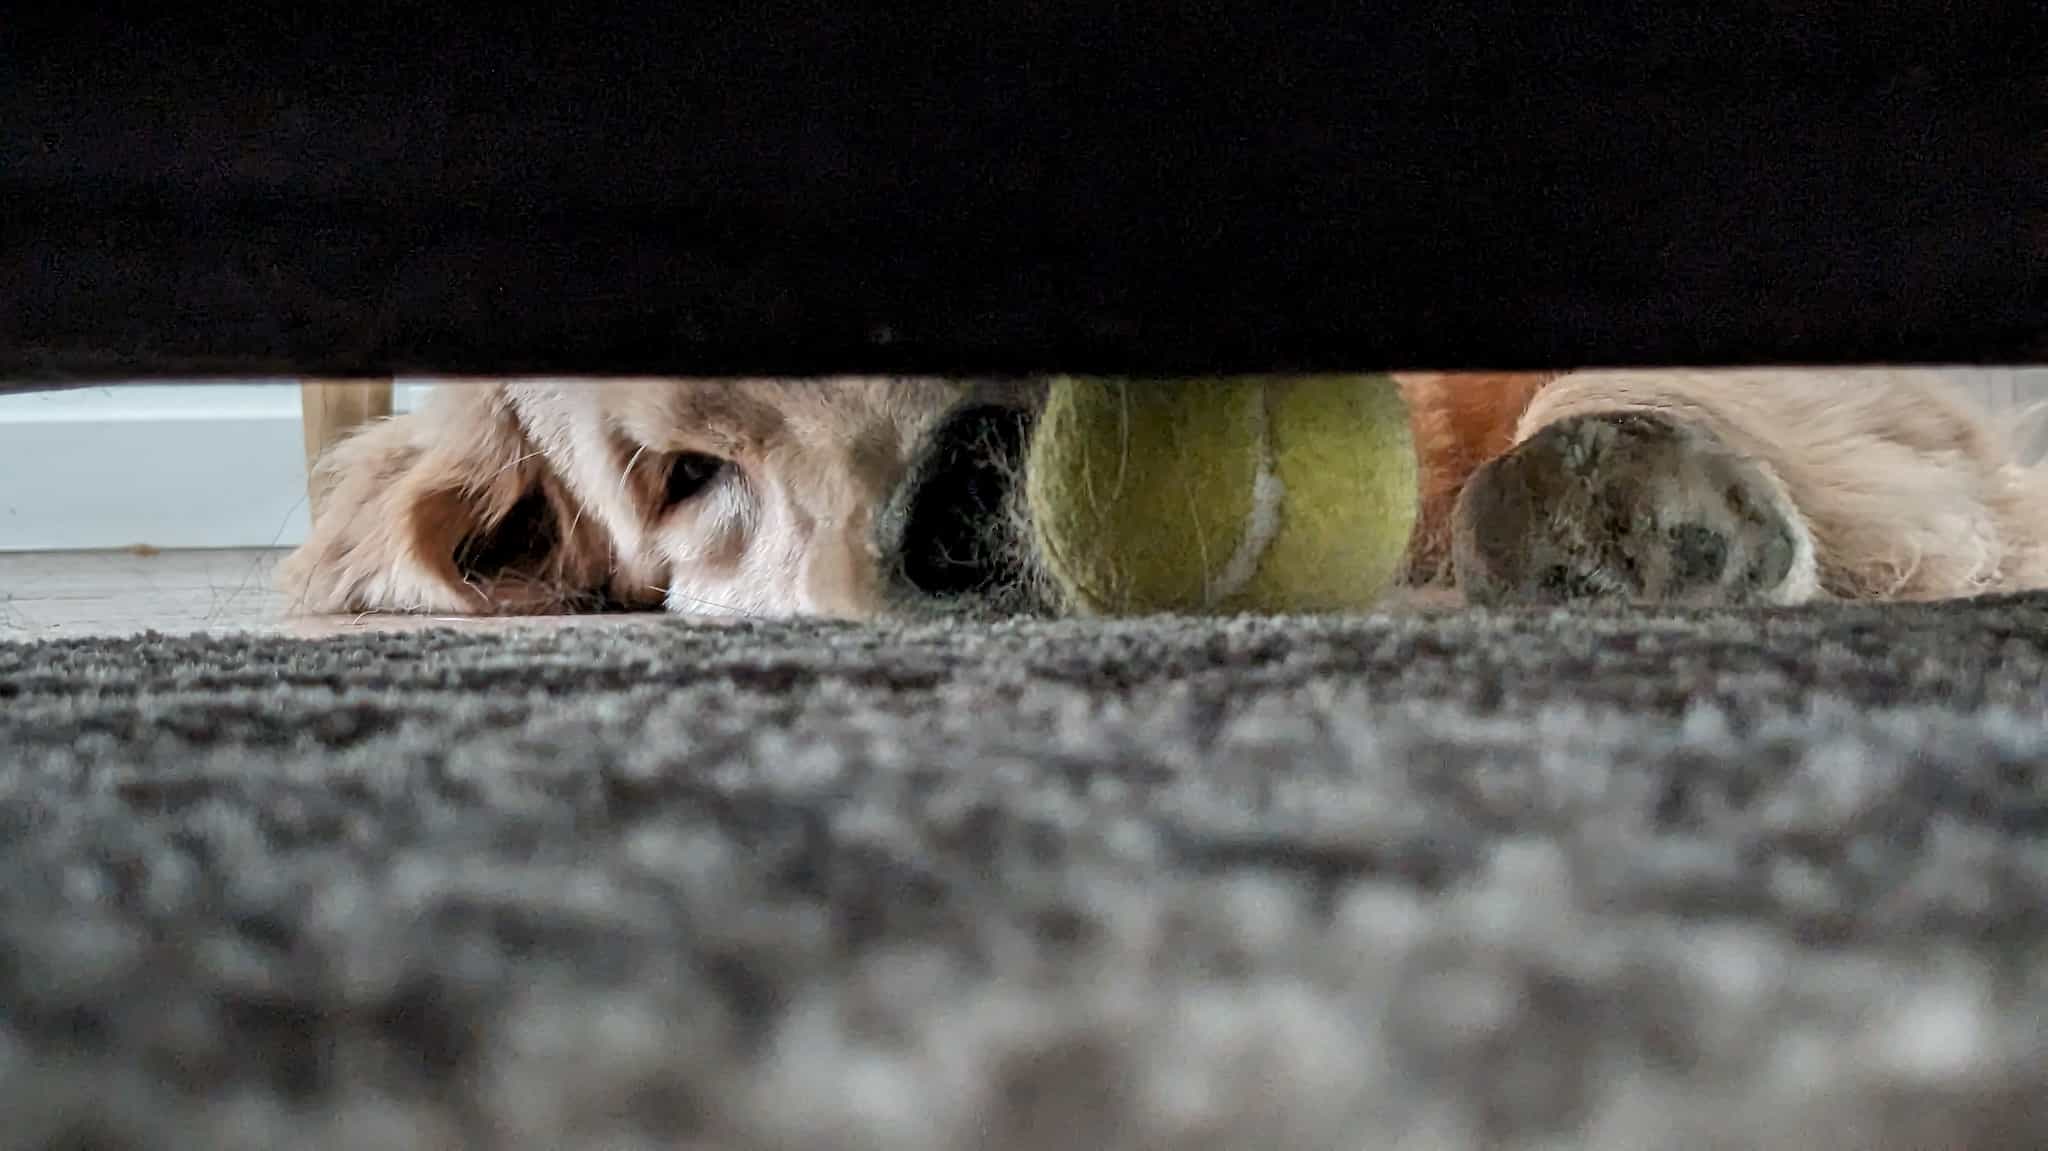 A dog reaching for a ball under a couch as seen from the other side.